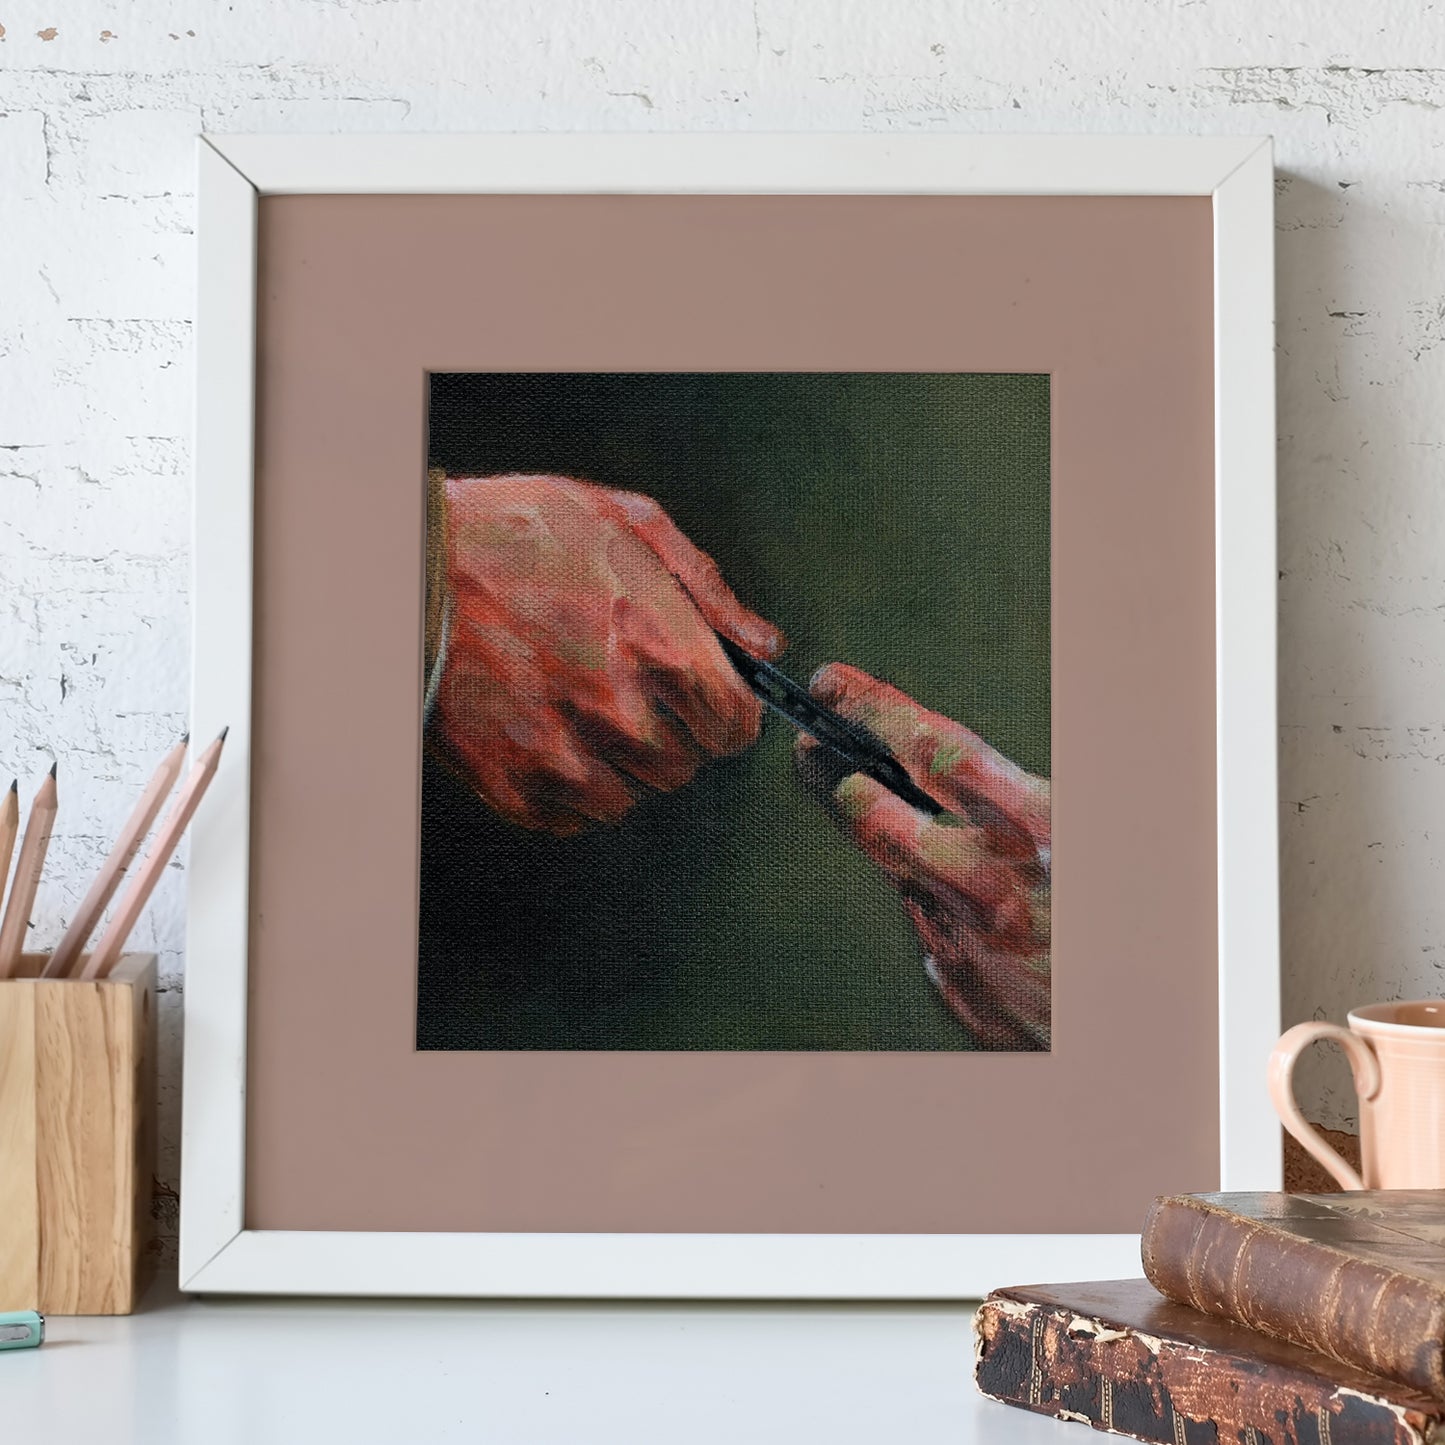 A white-framed lithograph against a white stone wall. The lithograph depicts a pair of hands against a green background. One hand is clutching a black cassette tape, giving it to the other In front of the lithograph is a pencil holder and a pair of leather-bound books.